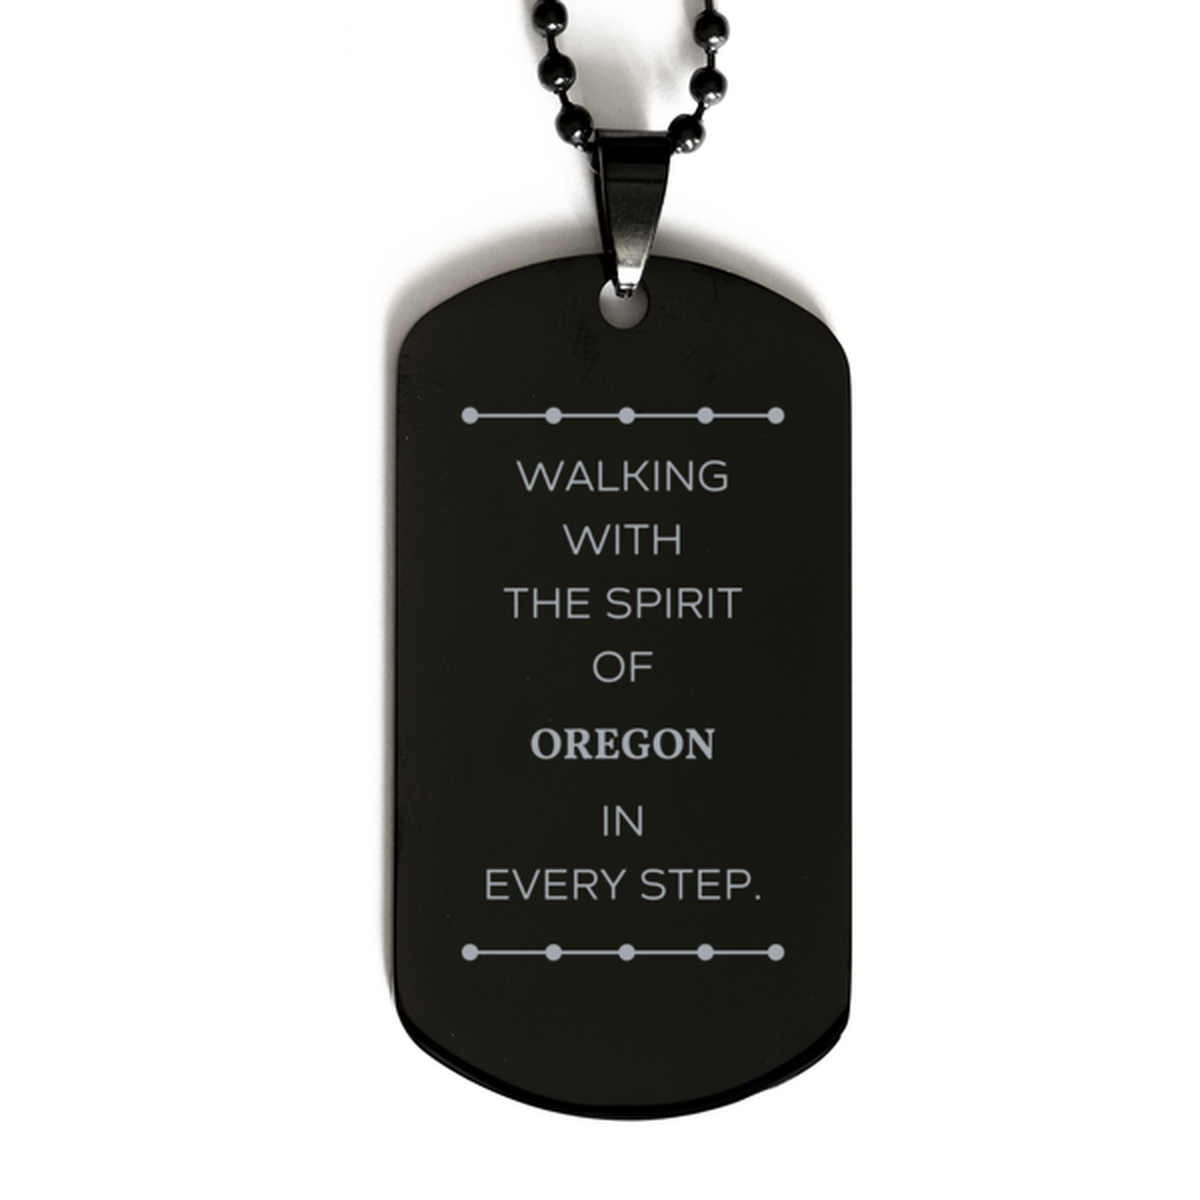 Oregon Gifts, Walking with the spirit, Love Oregon Birthday Christmas Black Dog Tag For Oregon People, Men, Women, Friends